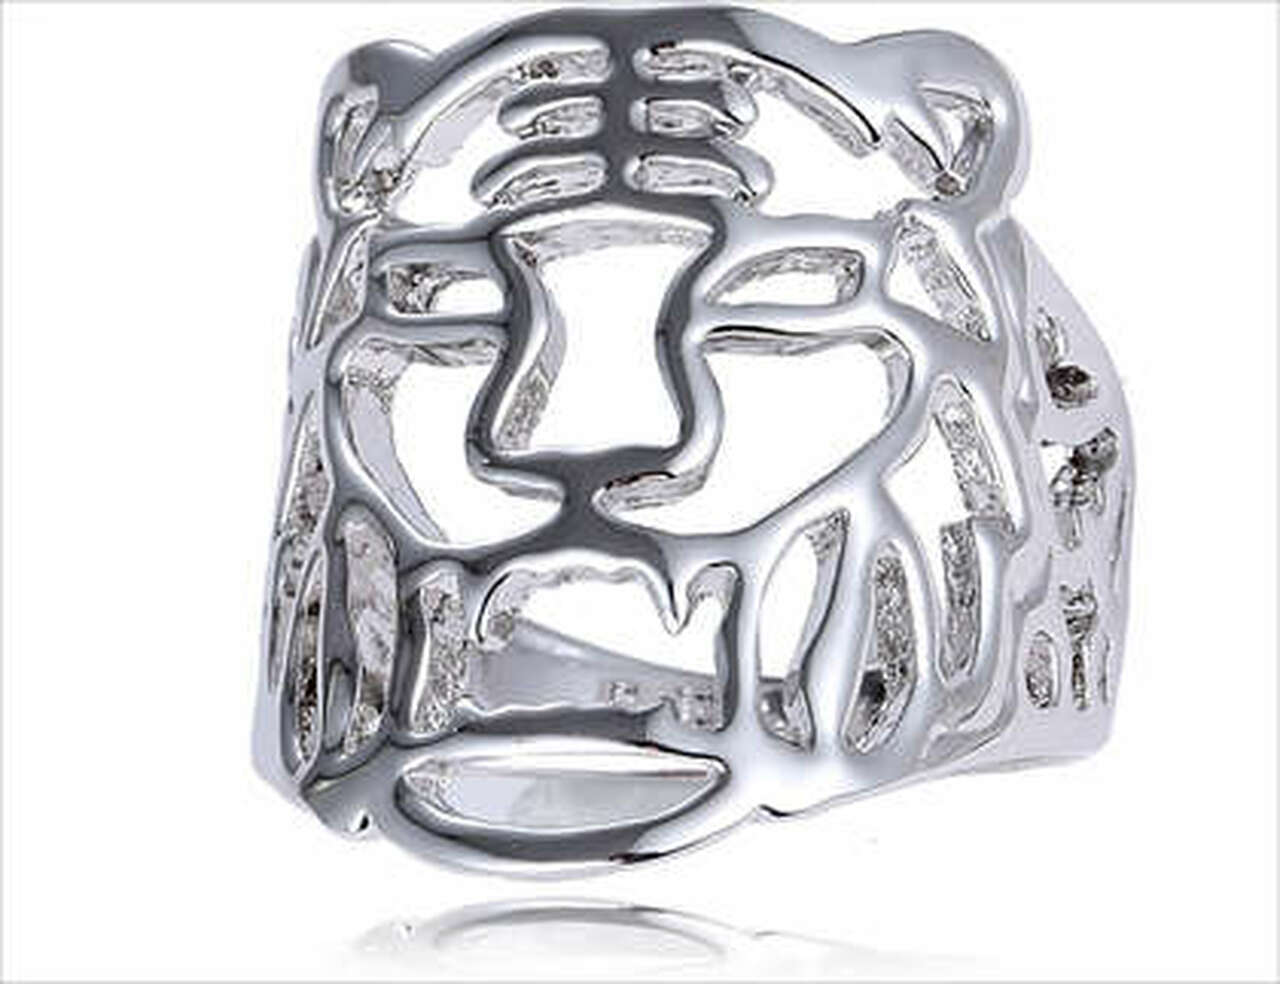 SILVER TIGER RING Jewelry FashionWear Collection 07 